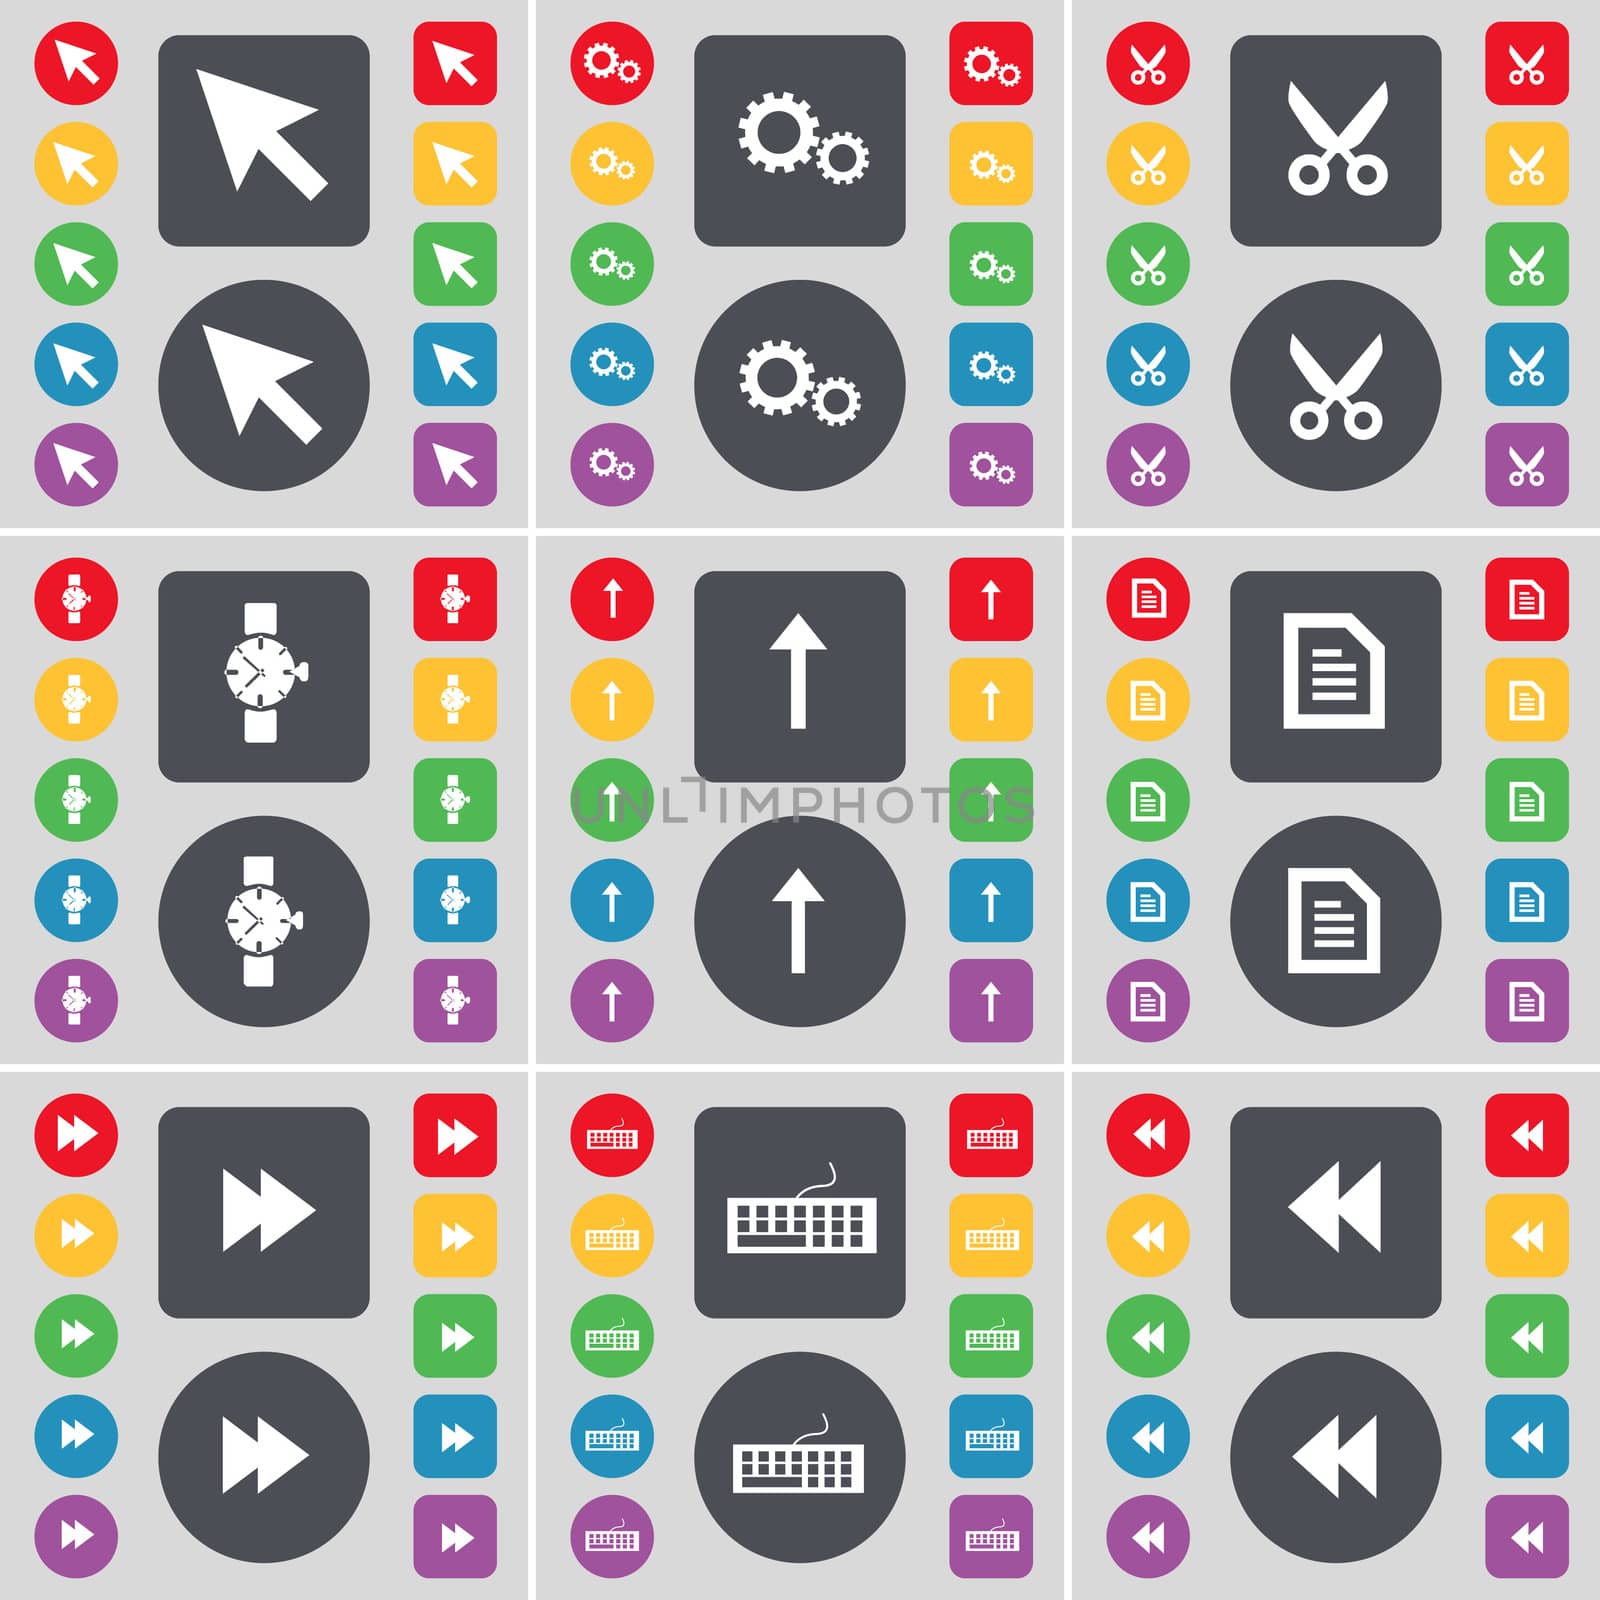 Cursor, Gear, Scissors, Wrist watch, Arrow up, Text file, Rewind, Keyboard icon symbol. A large set of flat, colored buttons for your design. illustration